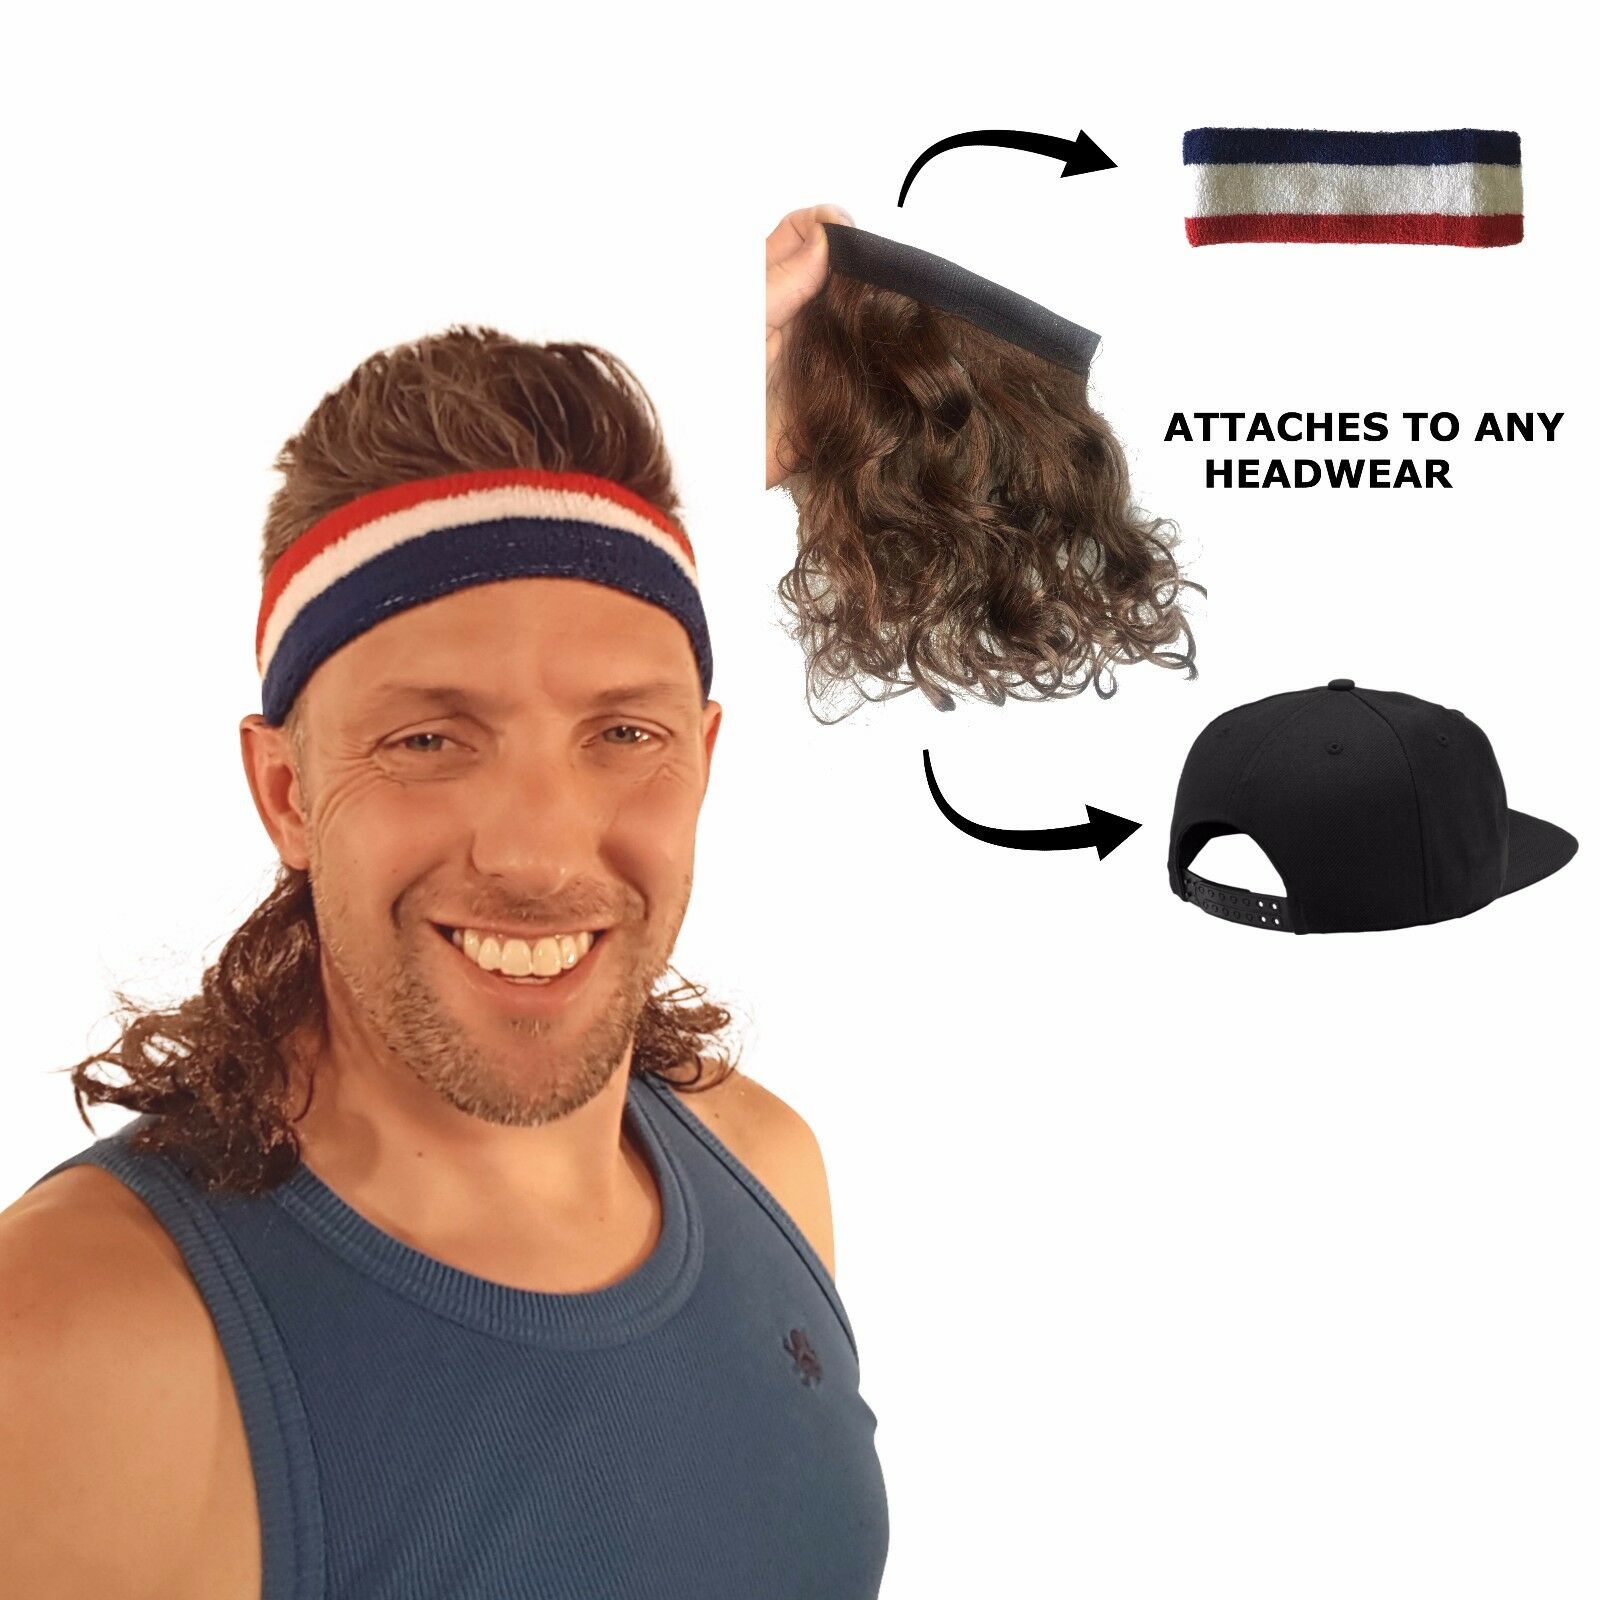 Magic Mullet - Wig Attaches To Any Headwear - Mullet Headband - Free Head Band